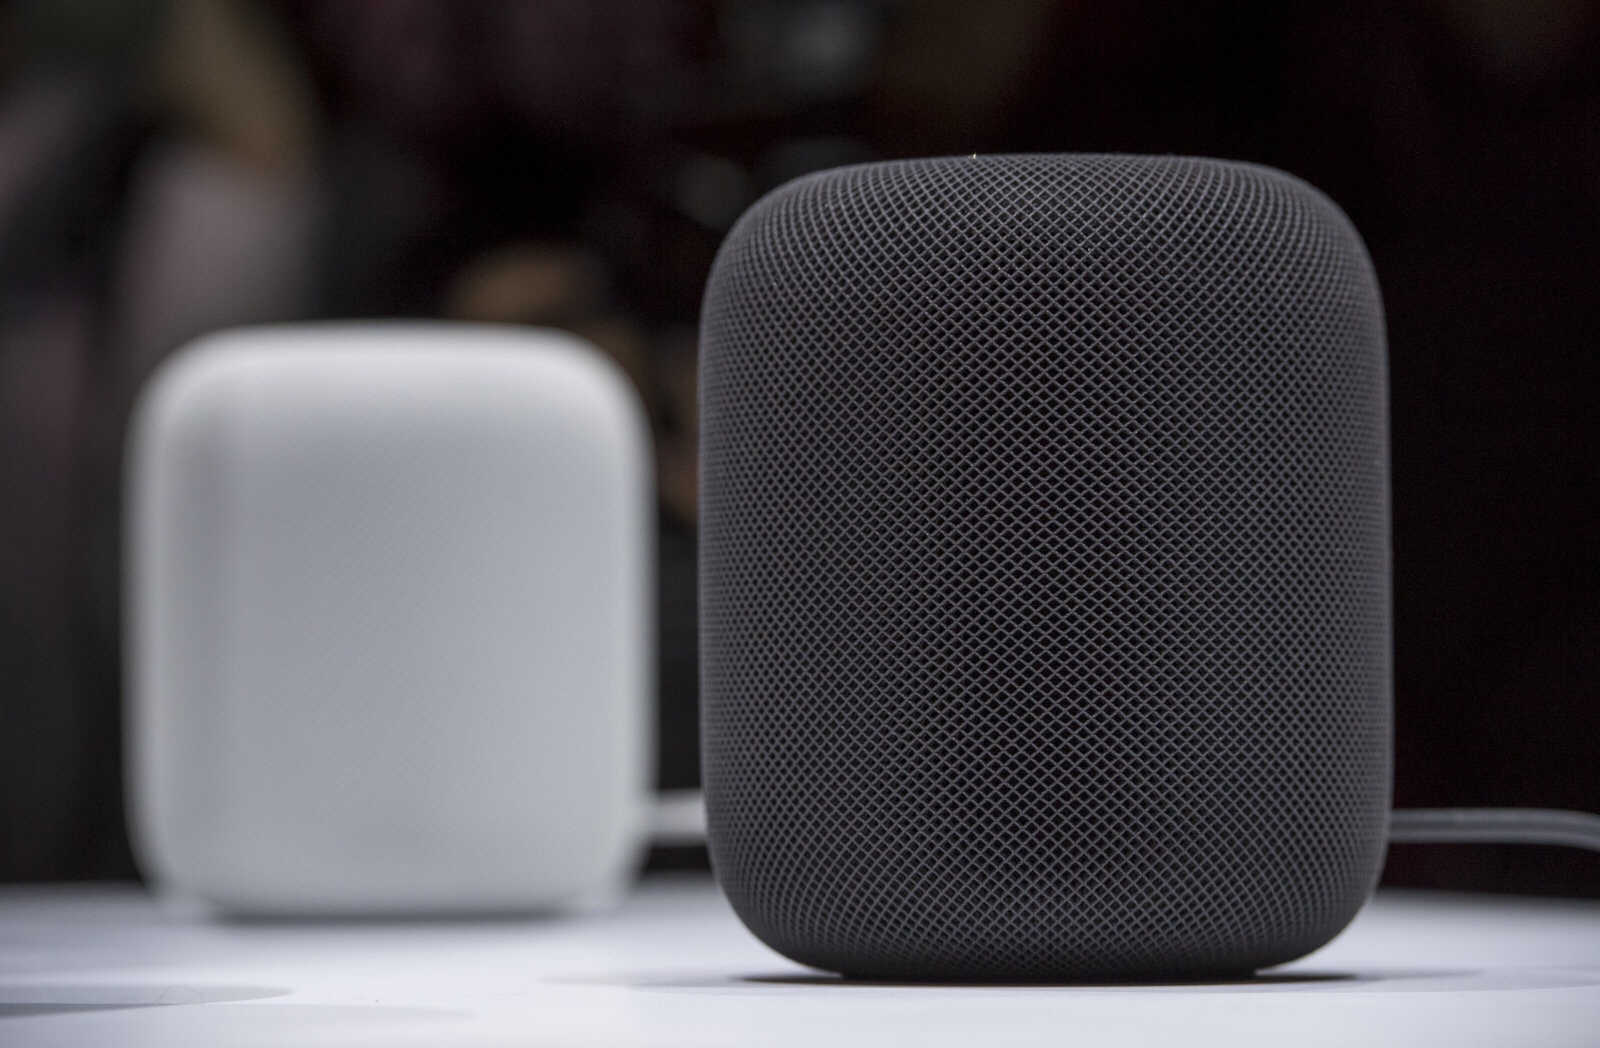 If you want Apple’s HomePod speaker, you’ll need an iOS device to work with it